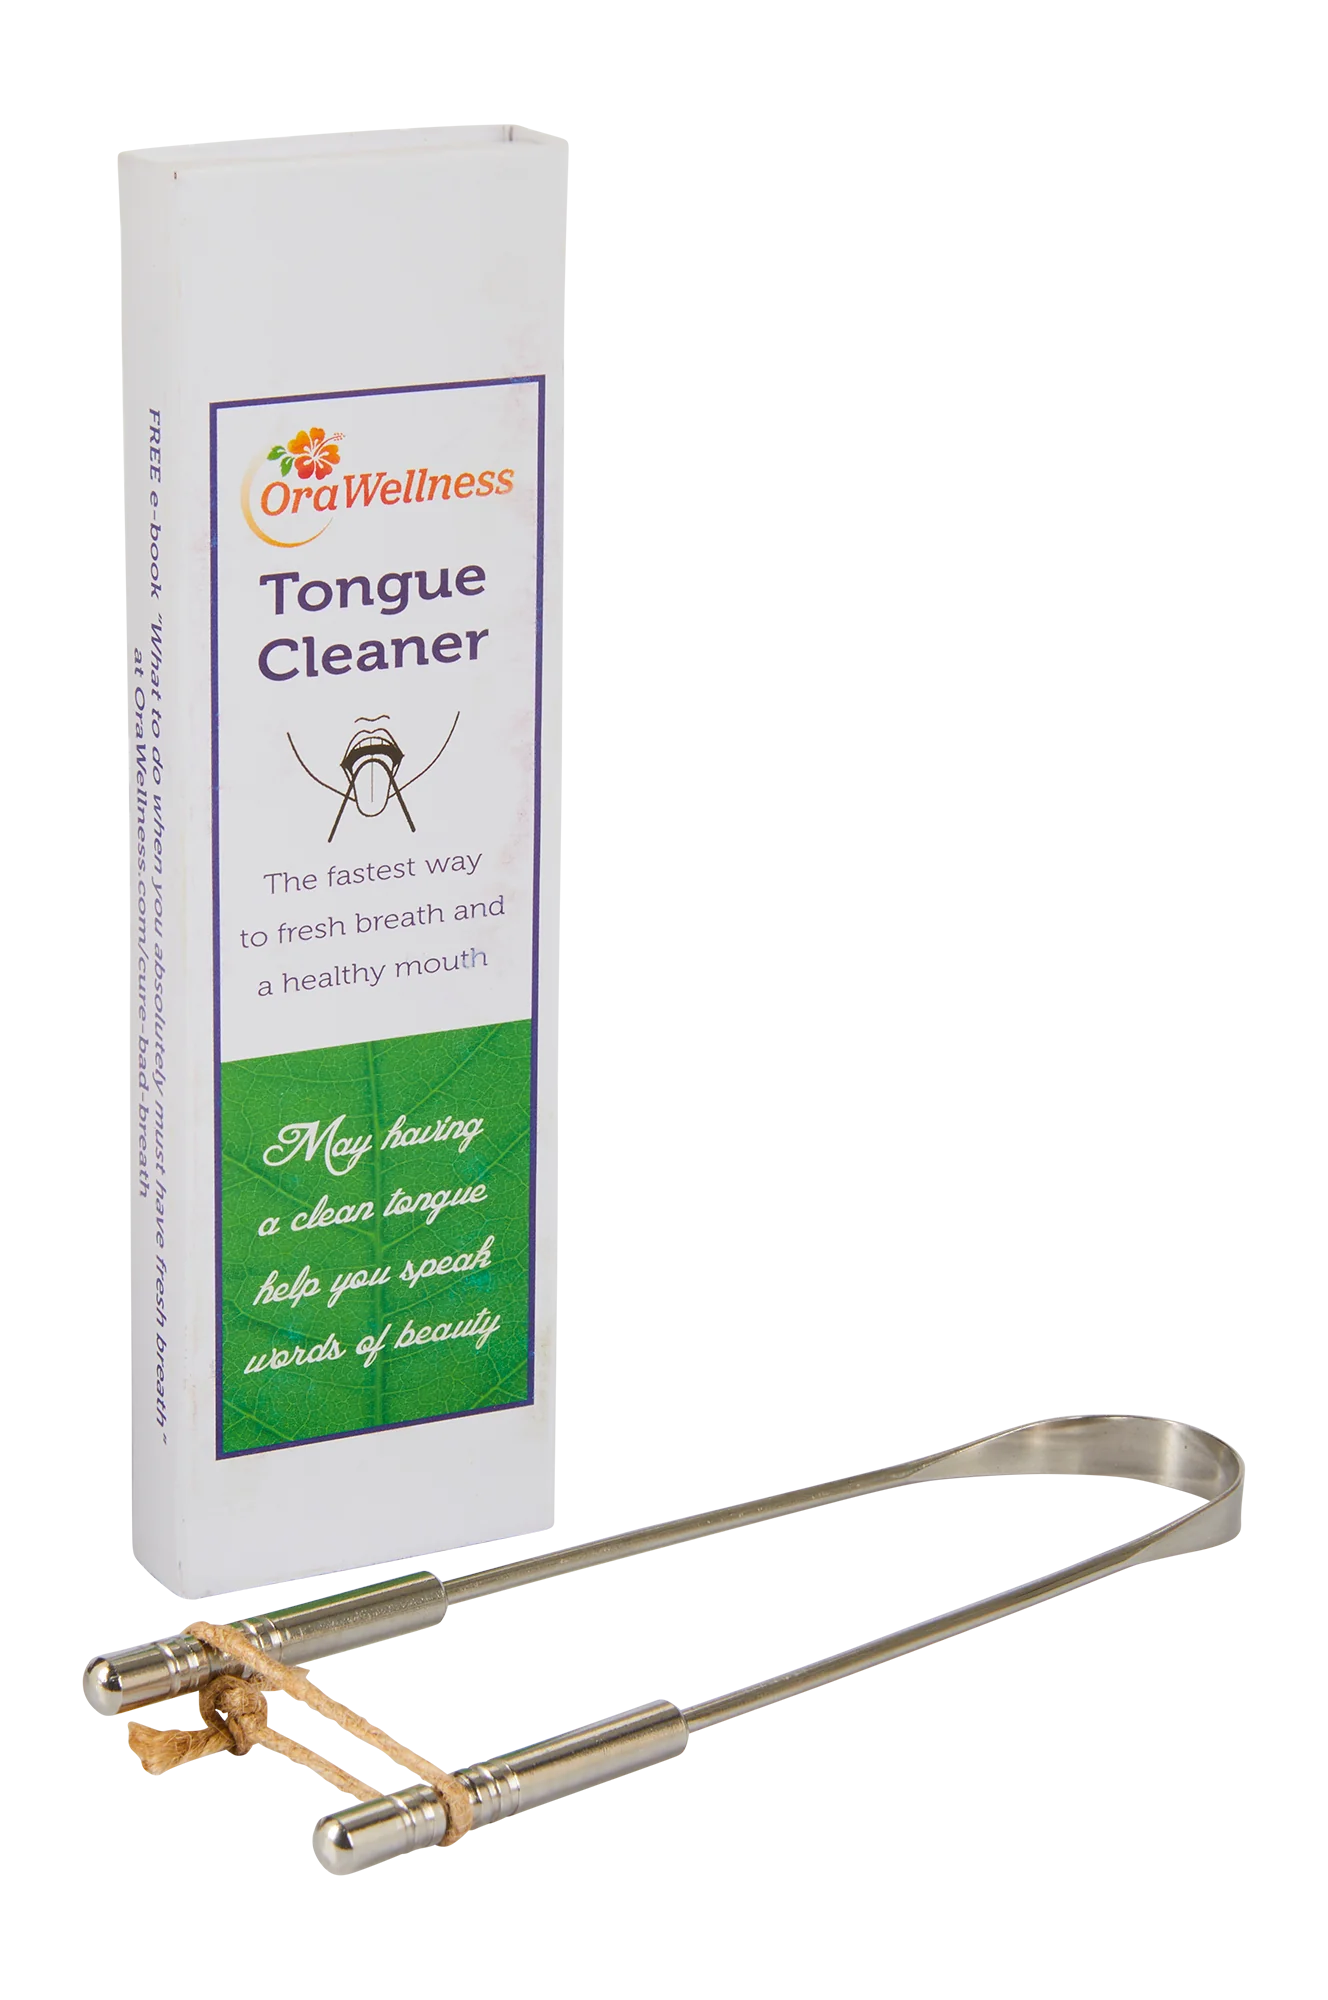 Tongue Cleaners